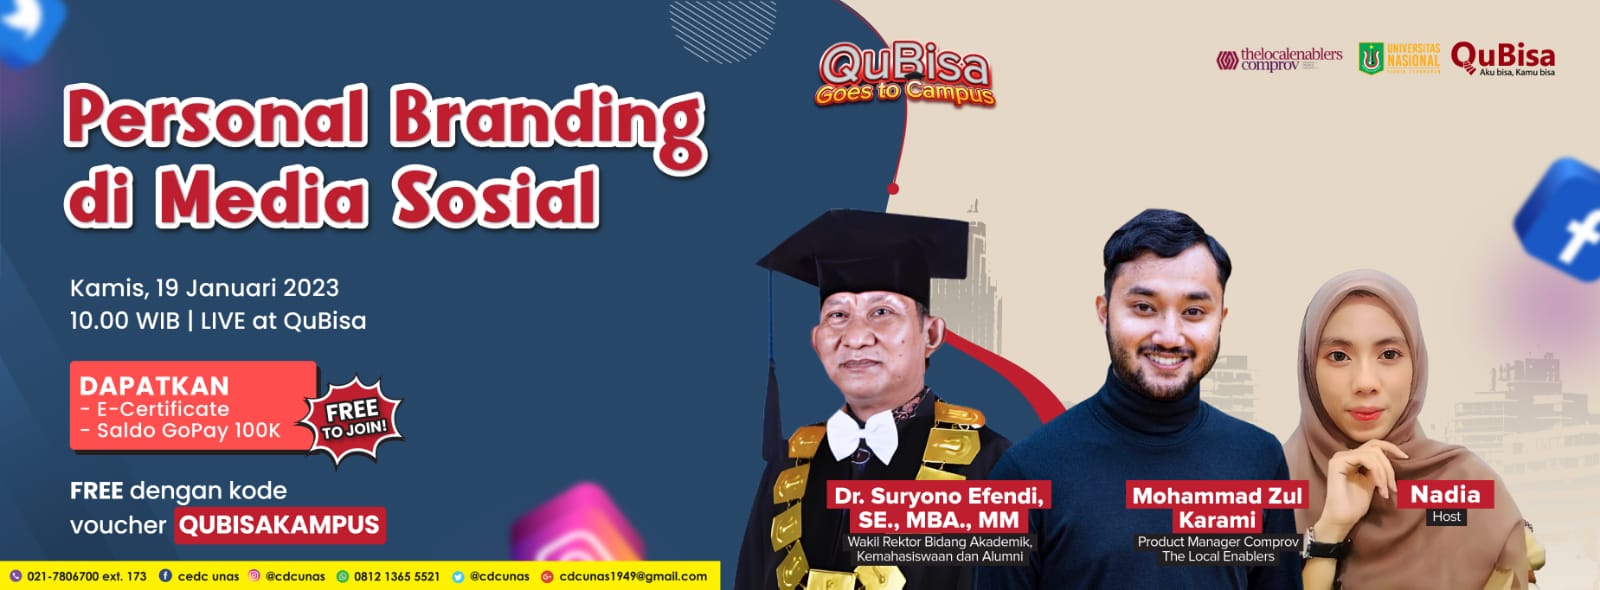 QuBisa Goes To Campus "Personal Branding di Media Sosial"